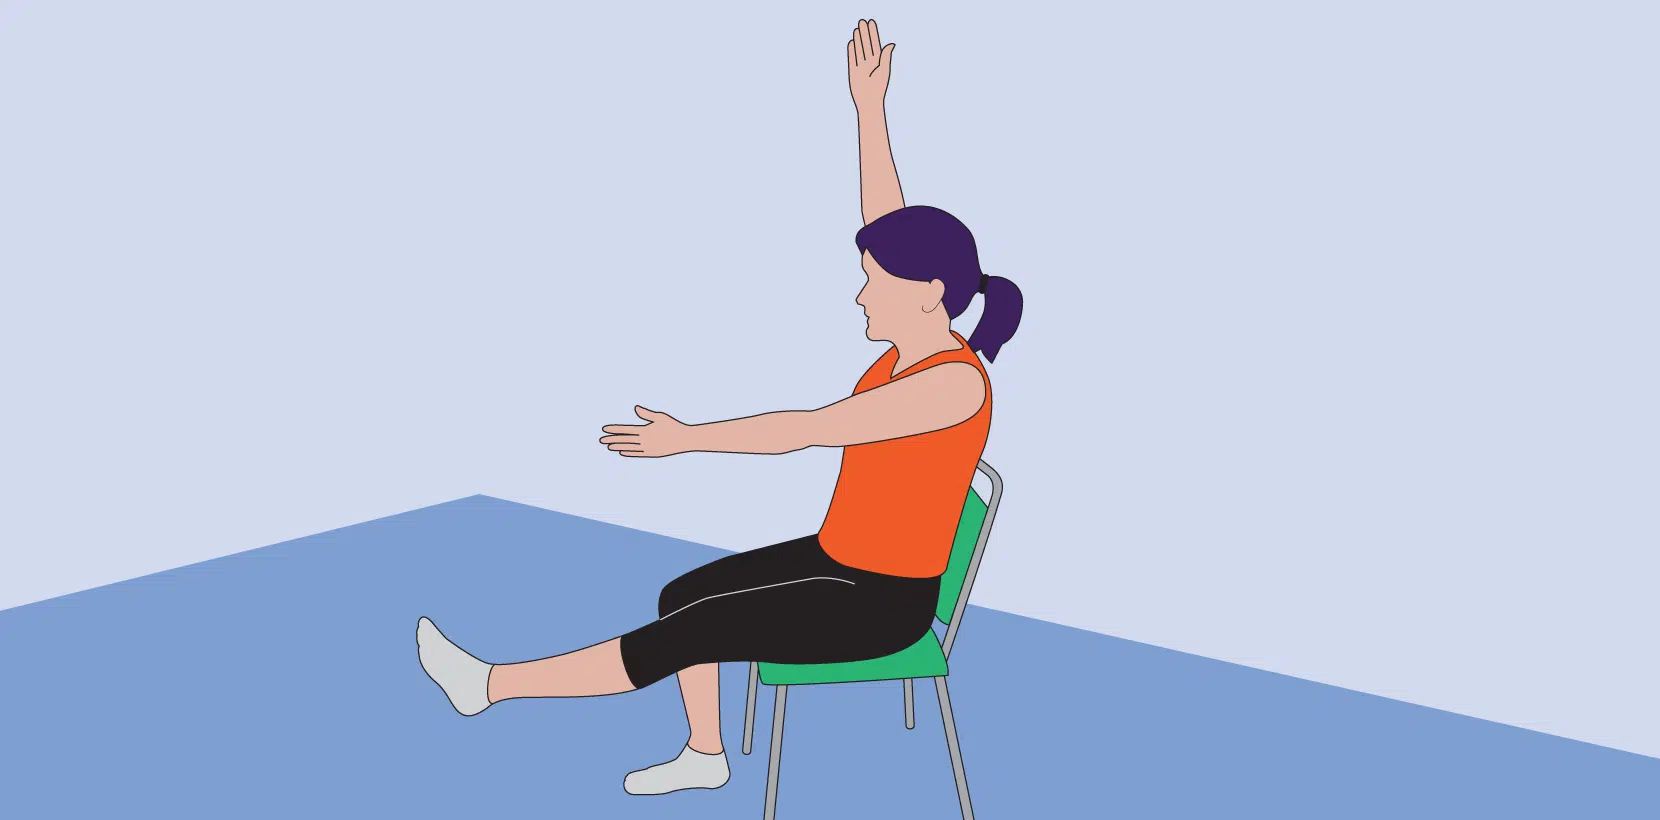 Core Exercises for Seniors with Back Pain: 20 Simple & Effective Exercises  Elderly of Any Level Can Do at Home to Build Balance and Relieve Pain